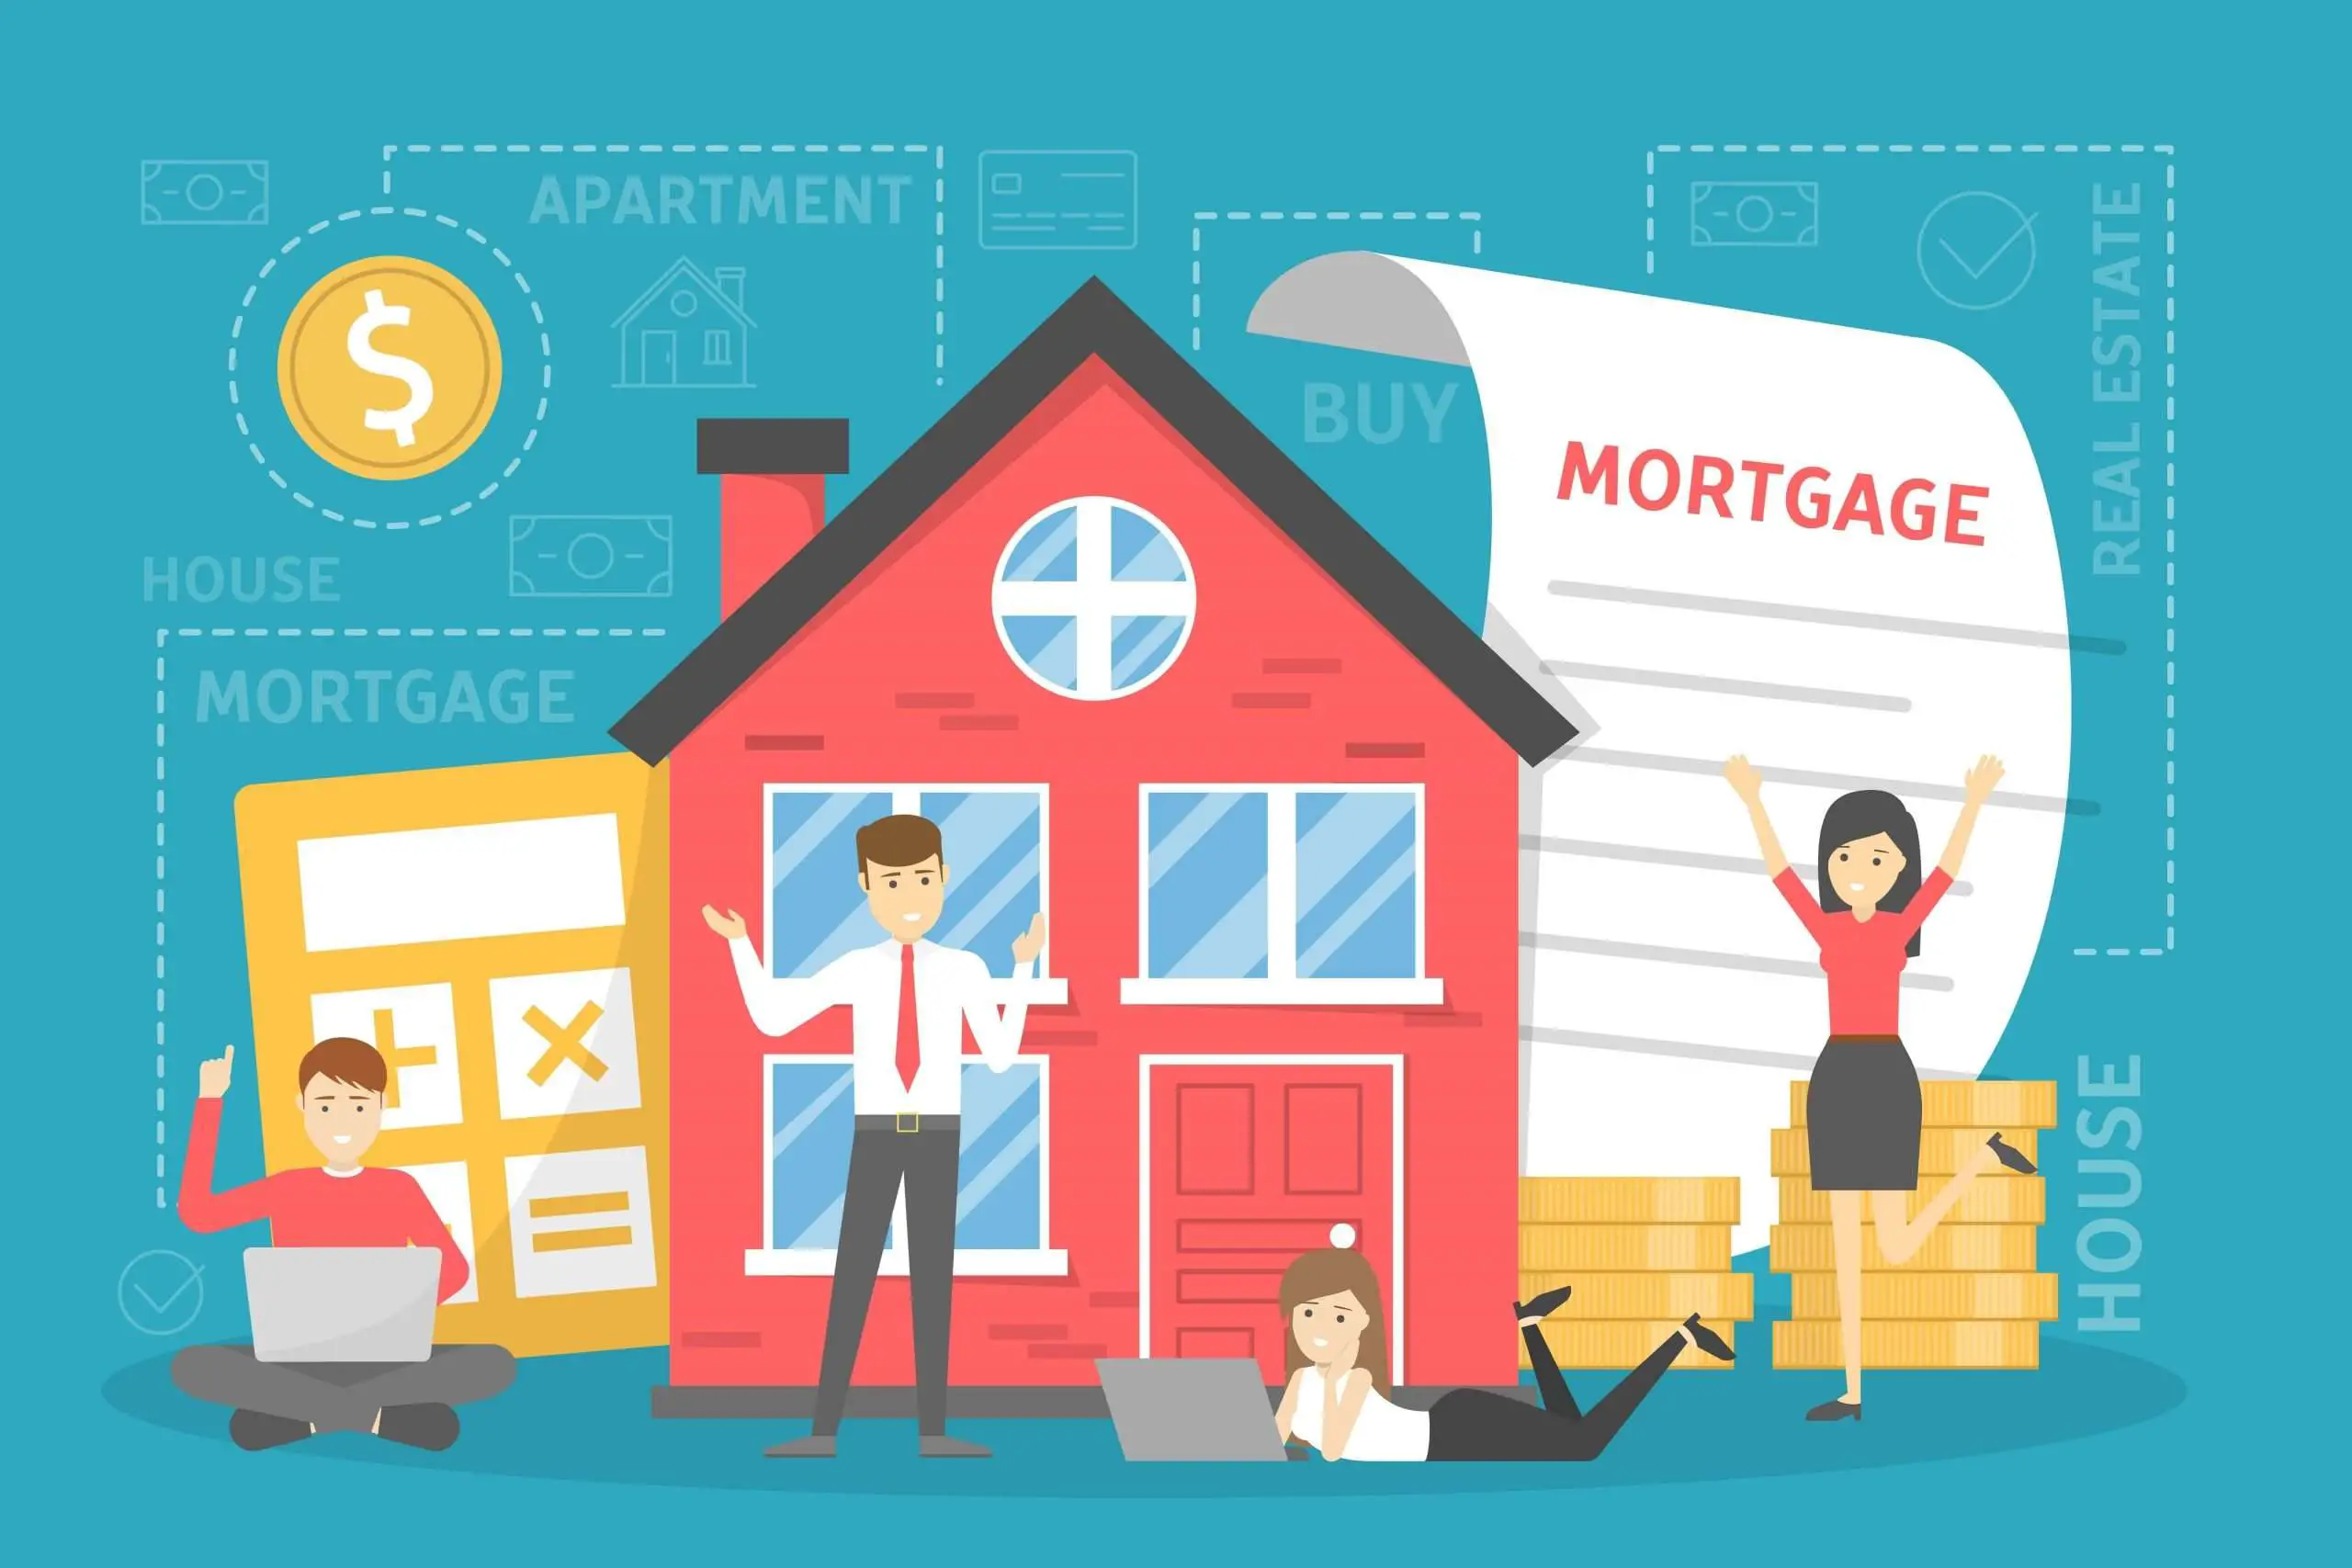 Physician Mortgage: How Much Can I Afford?